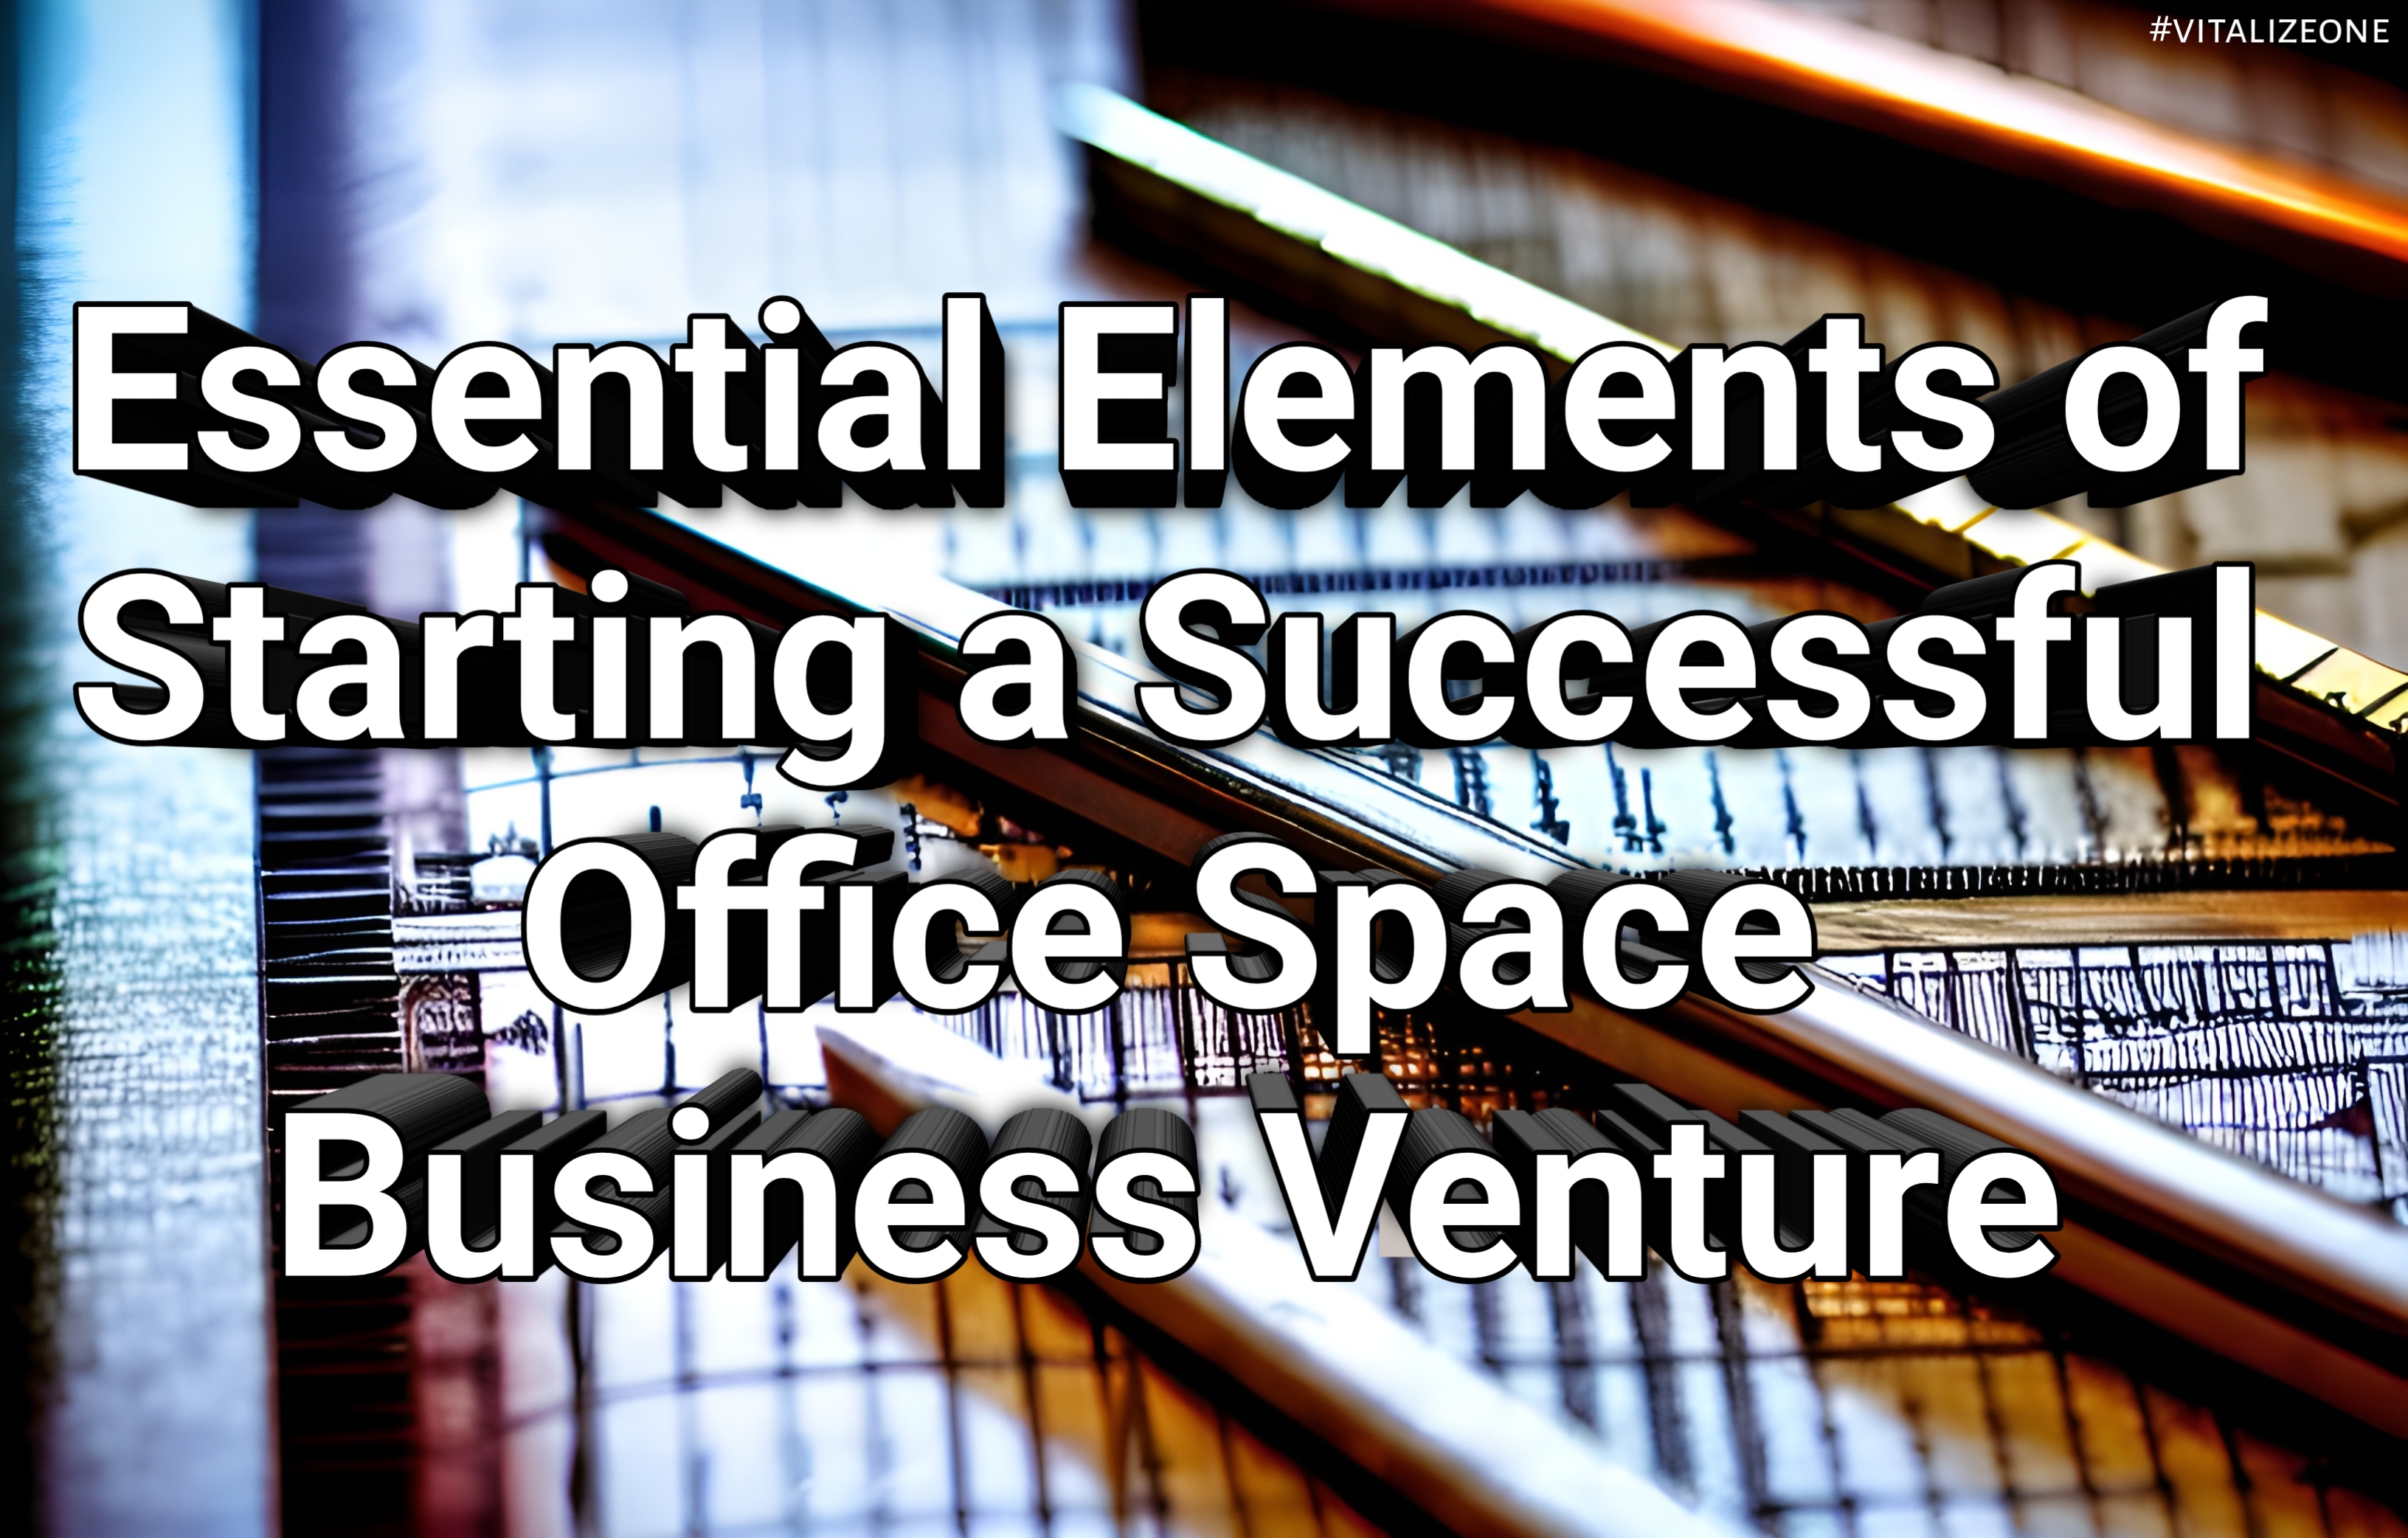 Essential Elements of Starting a Successful Office Space Business Venture | VitalyTennant.com | #vitalizeone 1